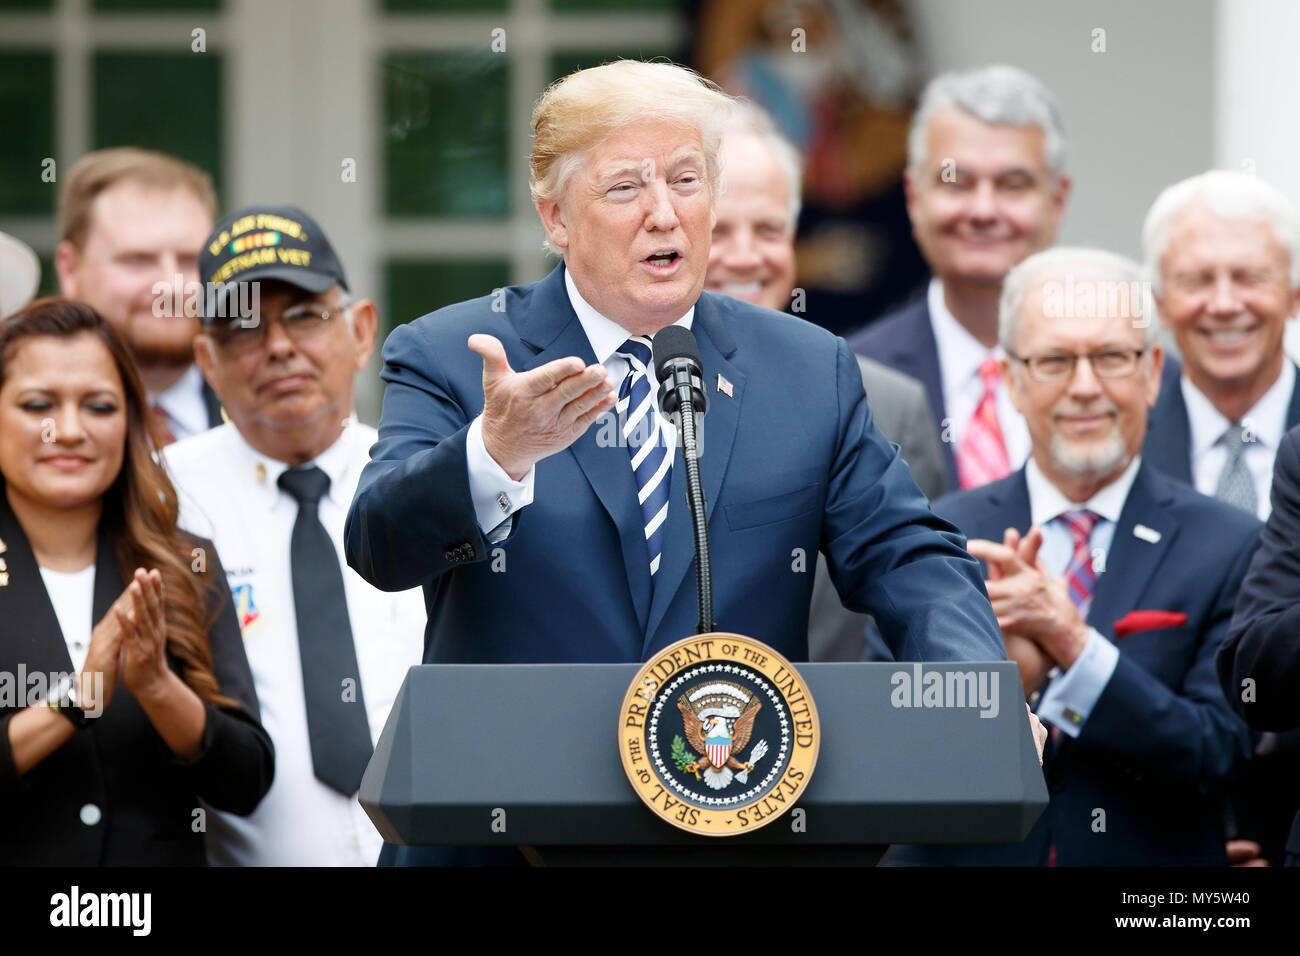 Washington, USA. 6th June, 2018. U.S. President Donald Trump (Front) speaks during a bill signing ceremony for the 'VA Mission Act of 2018' in the Rose Garden of the White House in Washington, DC, the United States, on June 6, 2018. Credit: Ting Shen/Xinhua/Alamy Live News Stock Photo